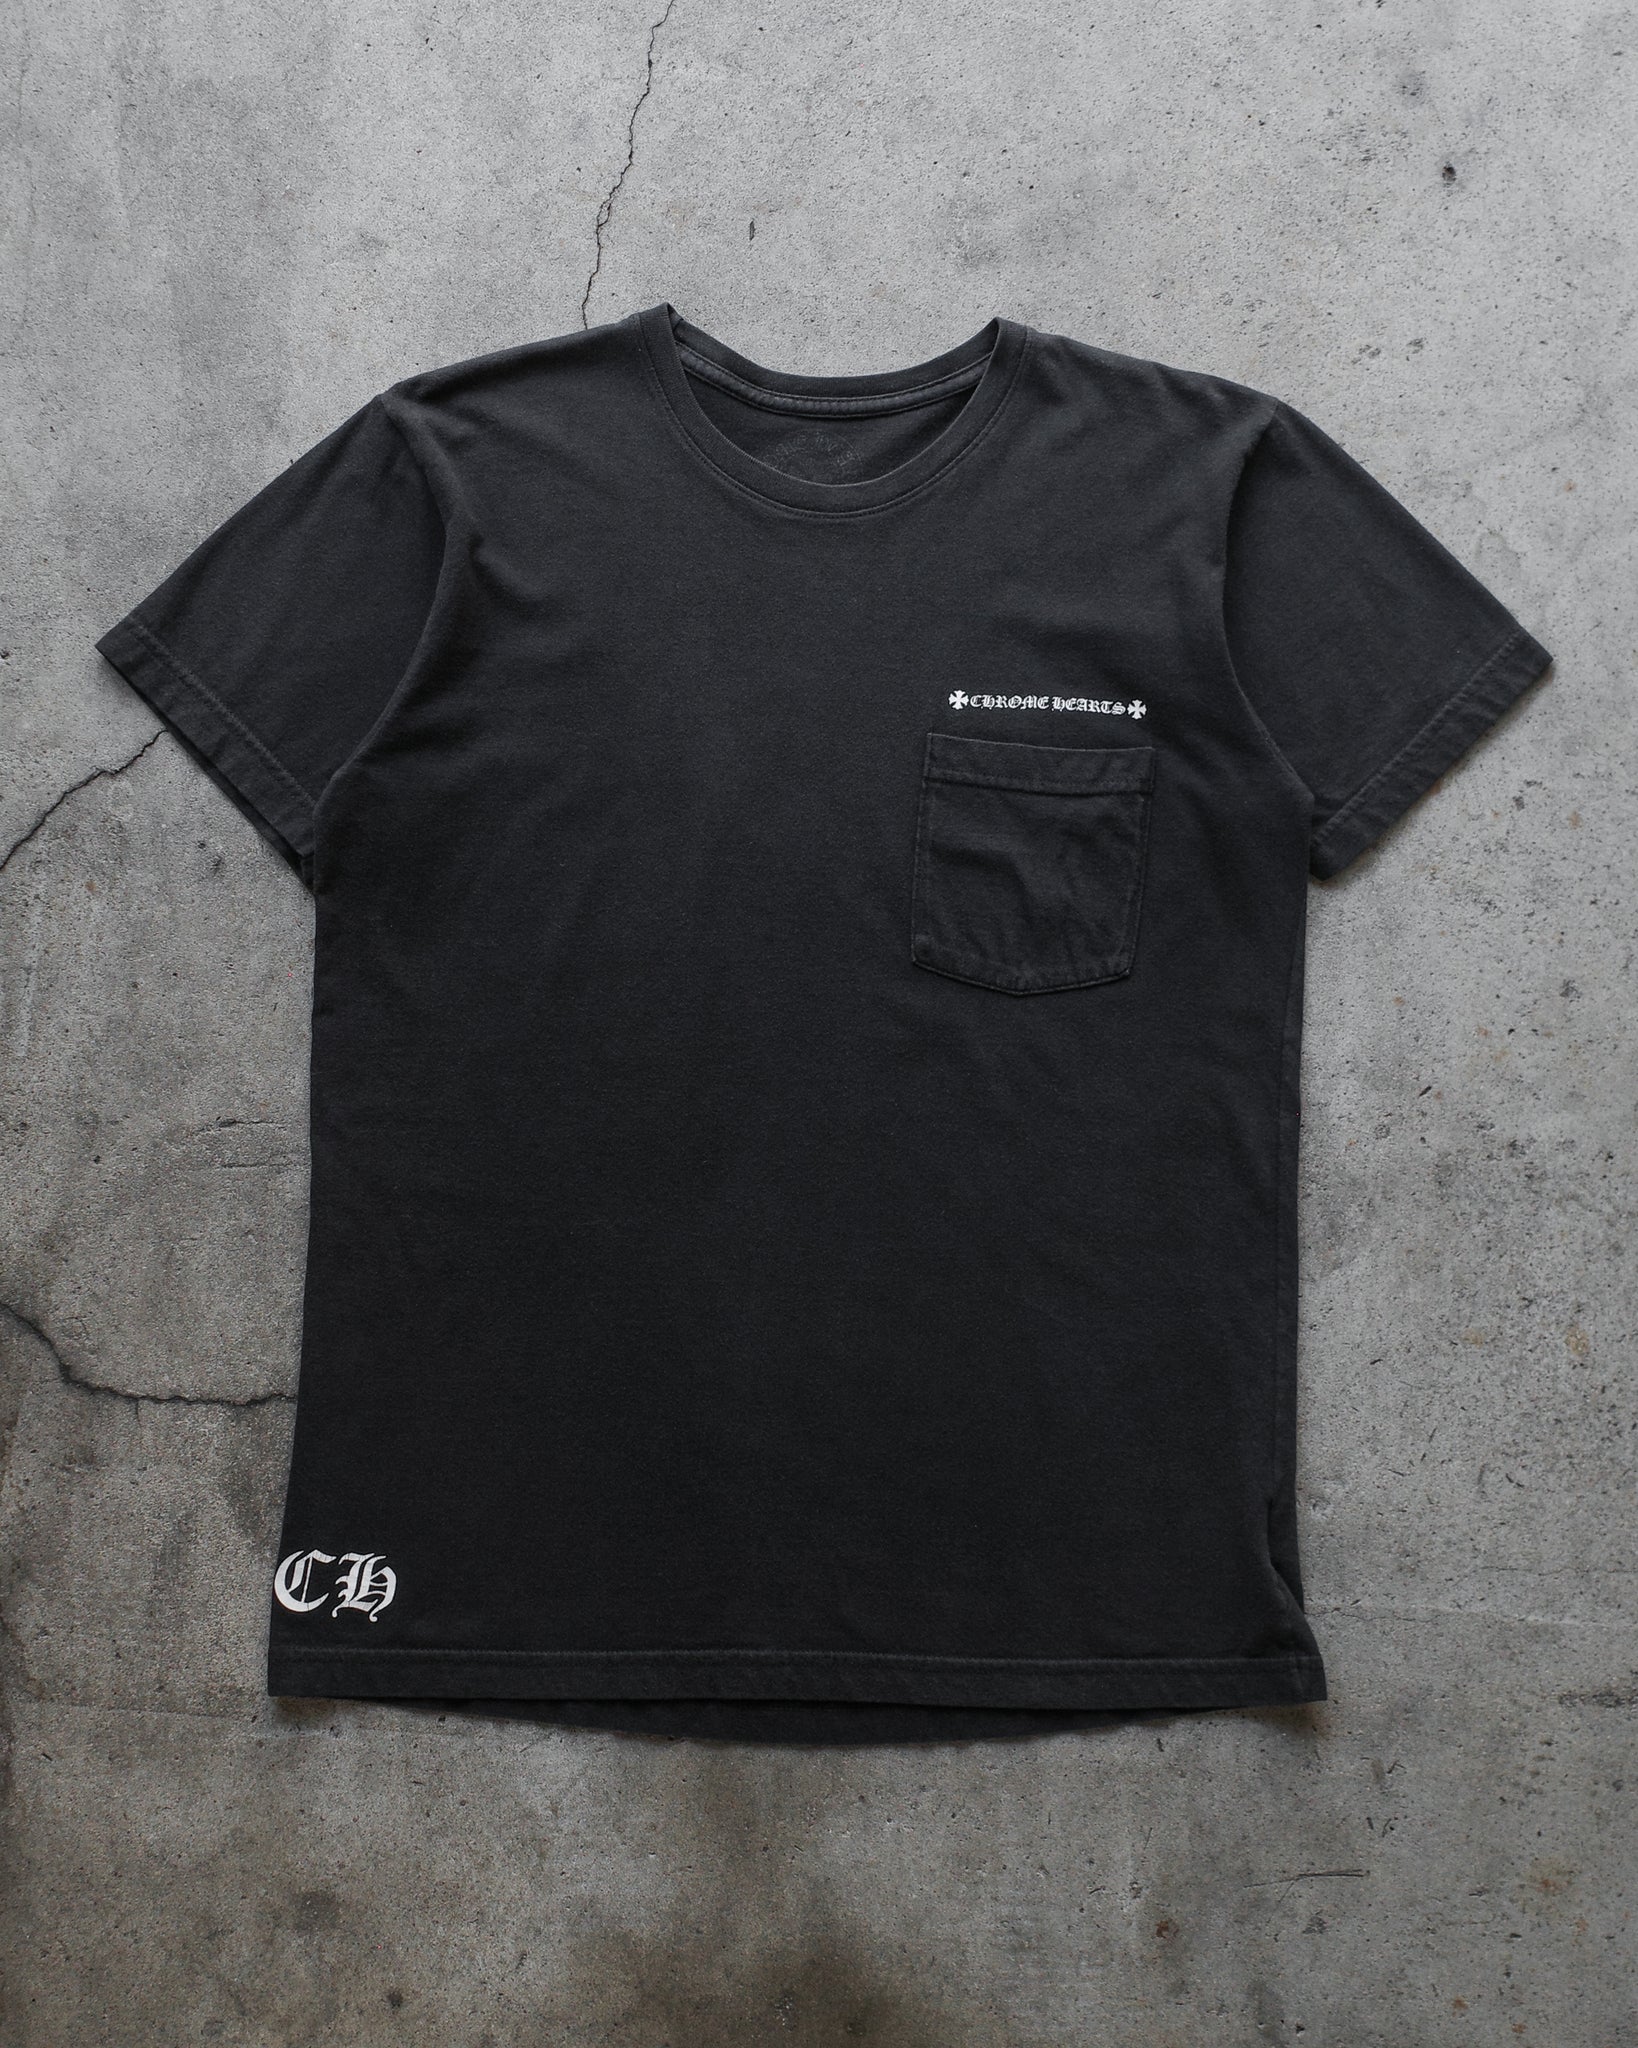 Chrome Hearts "Made in Hollywood" Pocket Tee